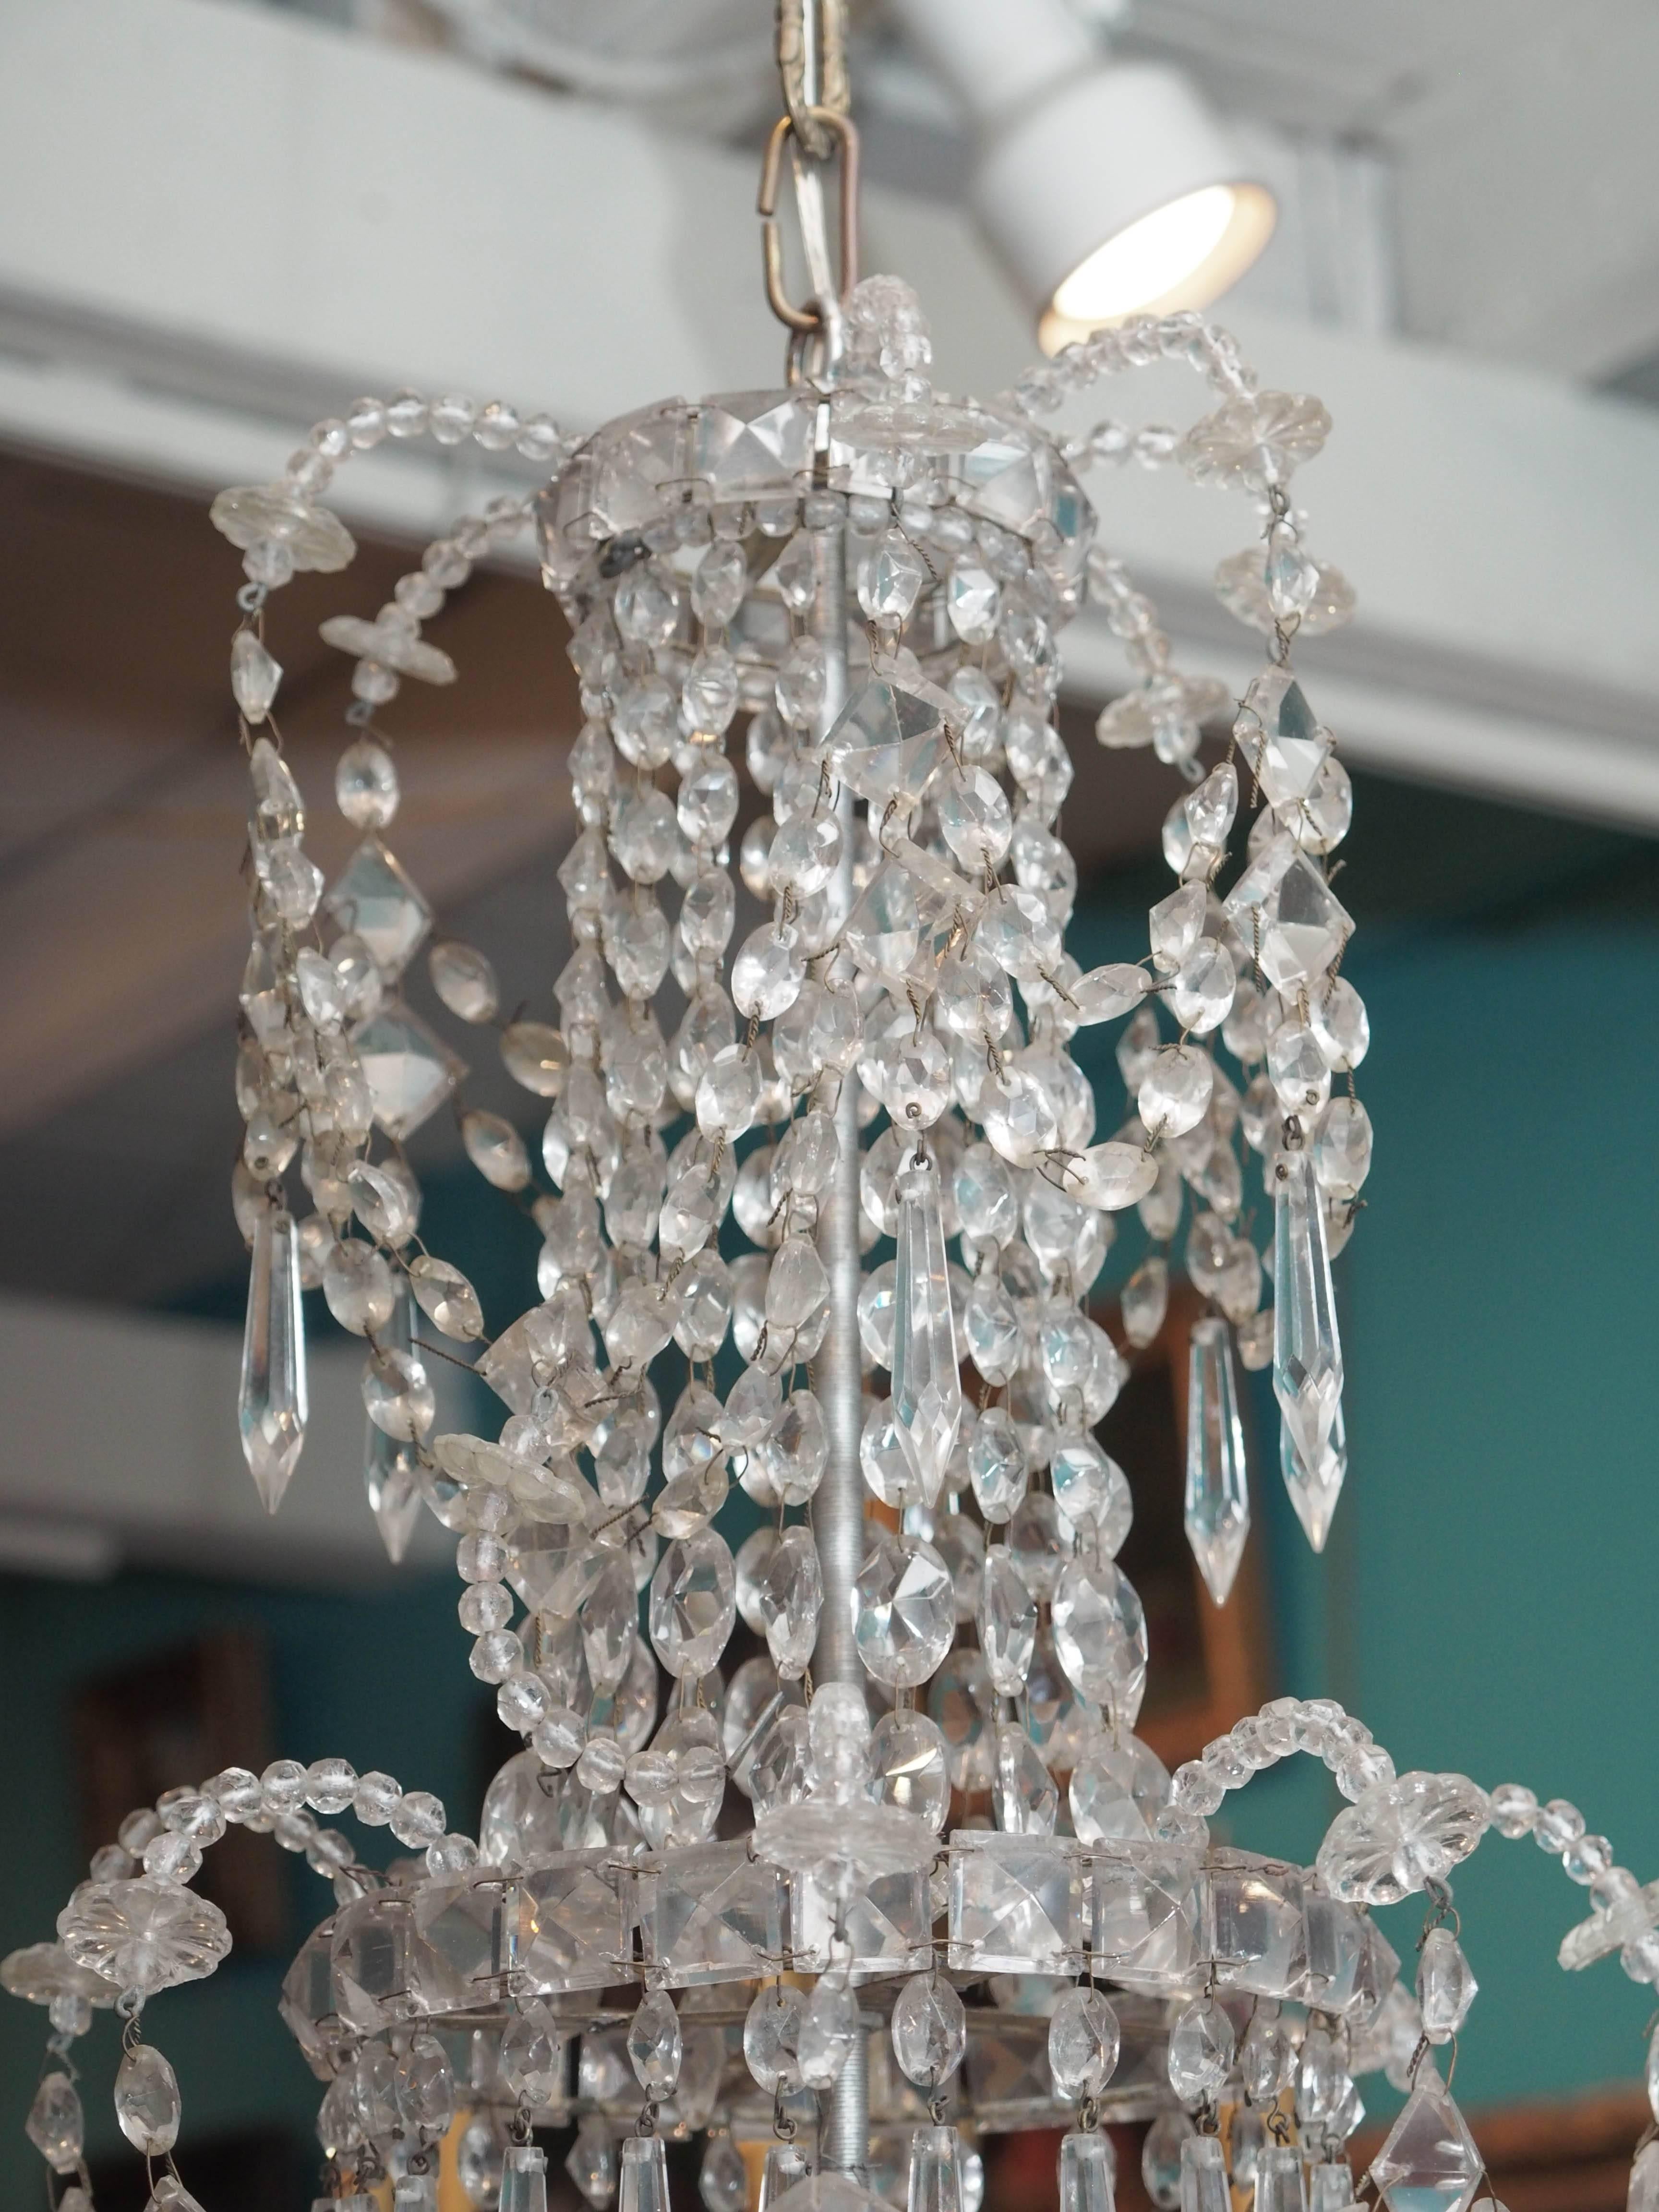 Early 19th century French Charles X period crystal chandelier with eight arms.